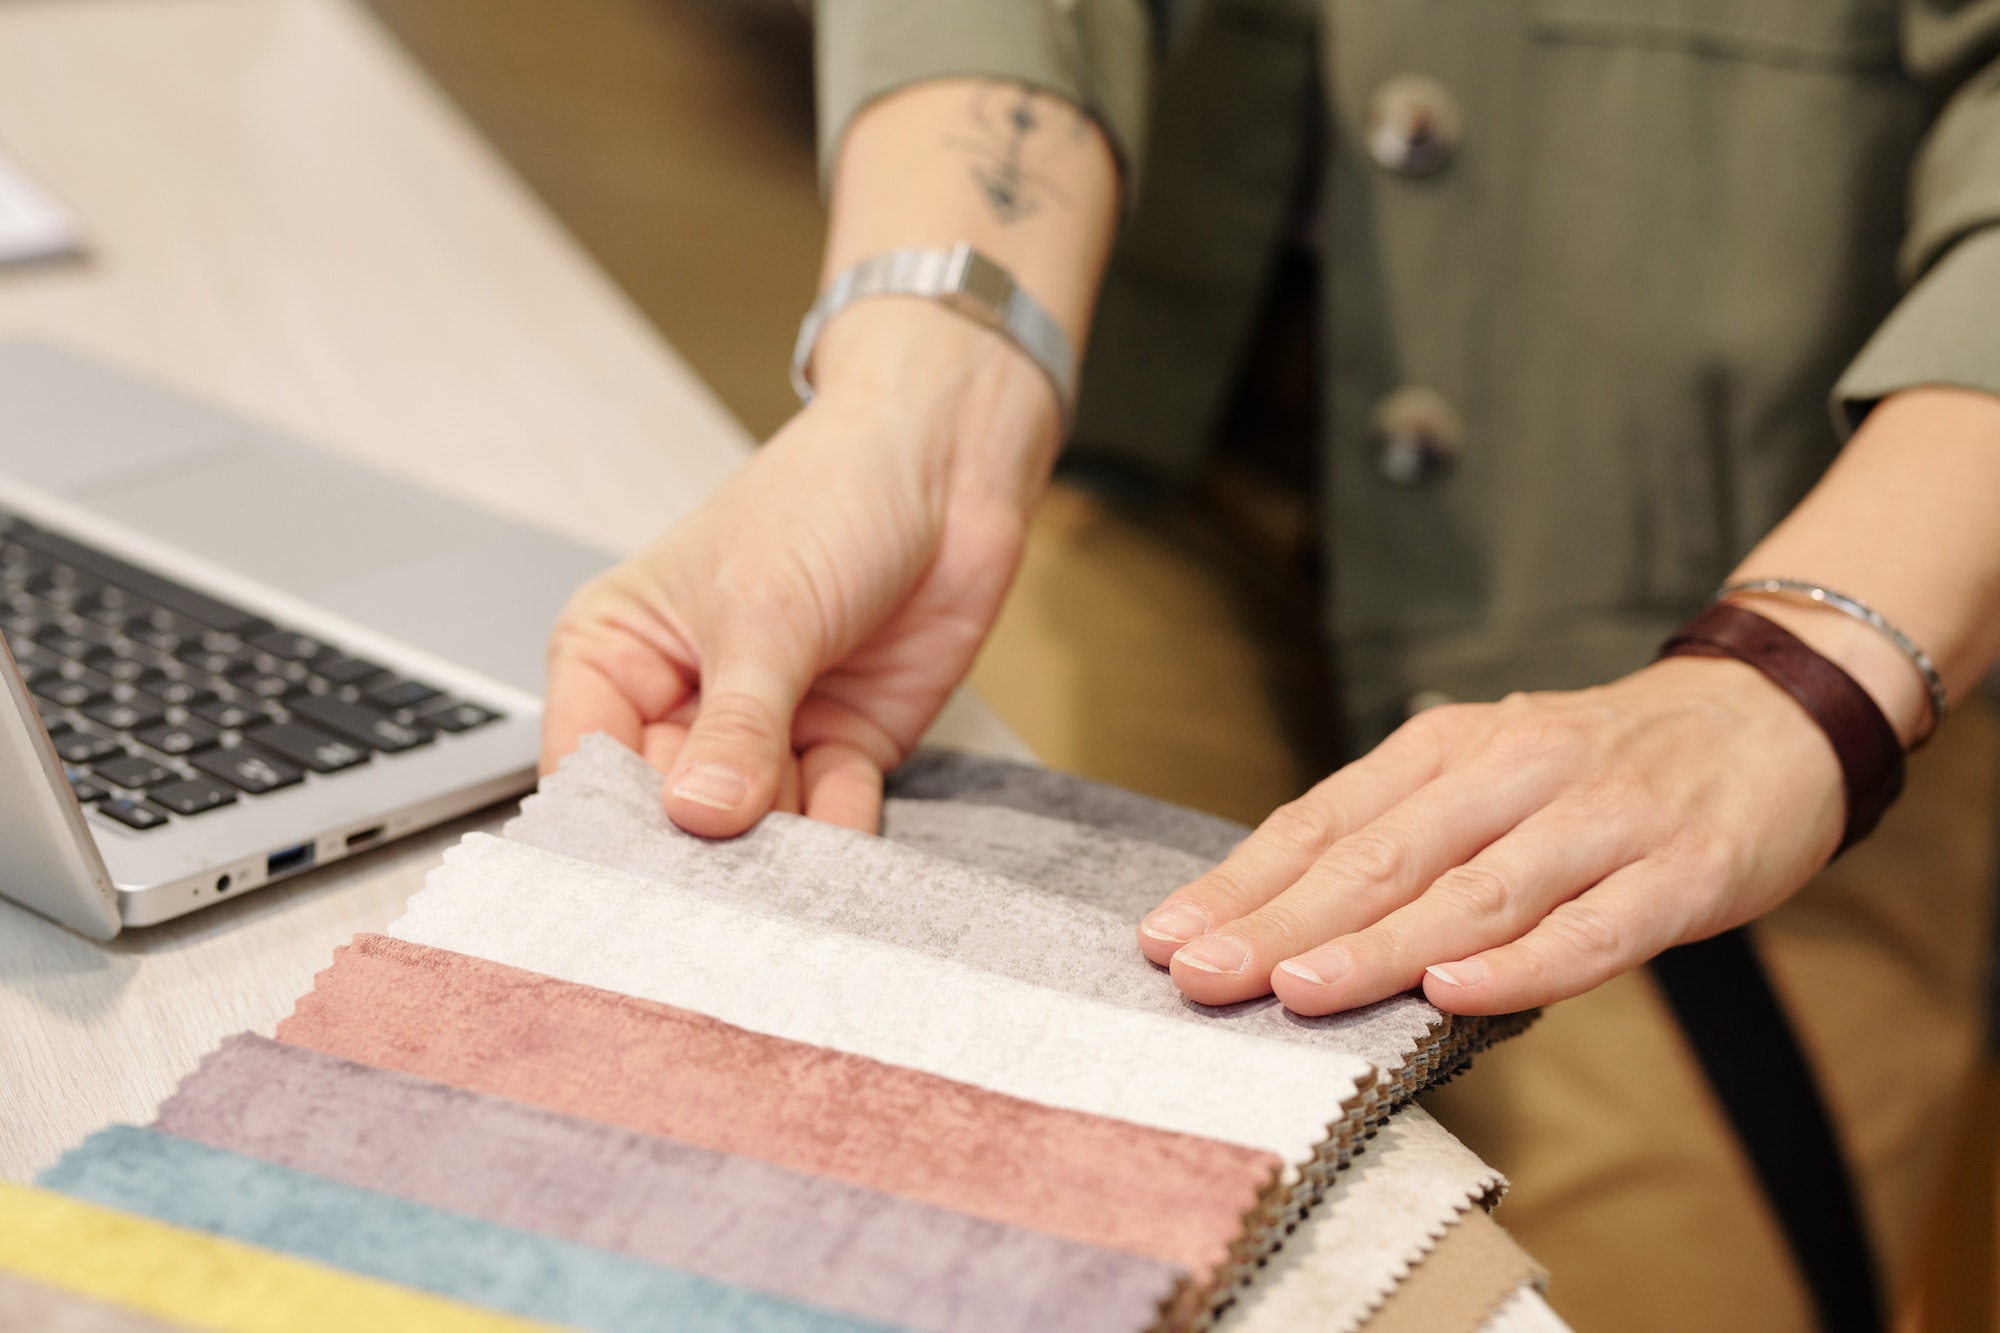 Hands of manager of studio of interior design looking through fabric samples